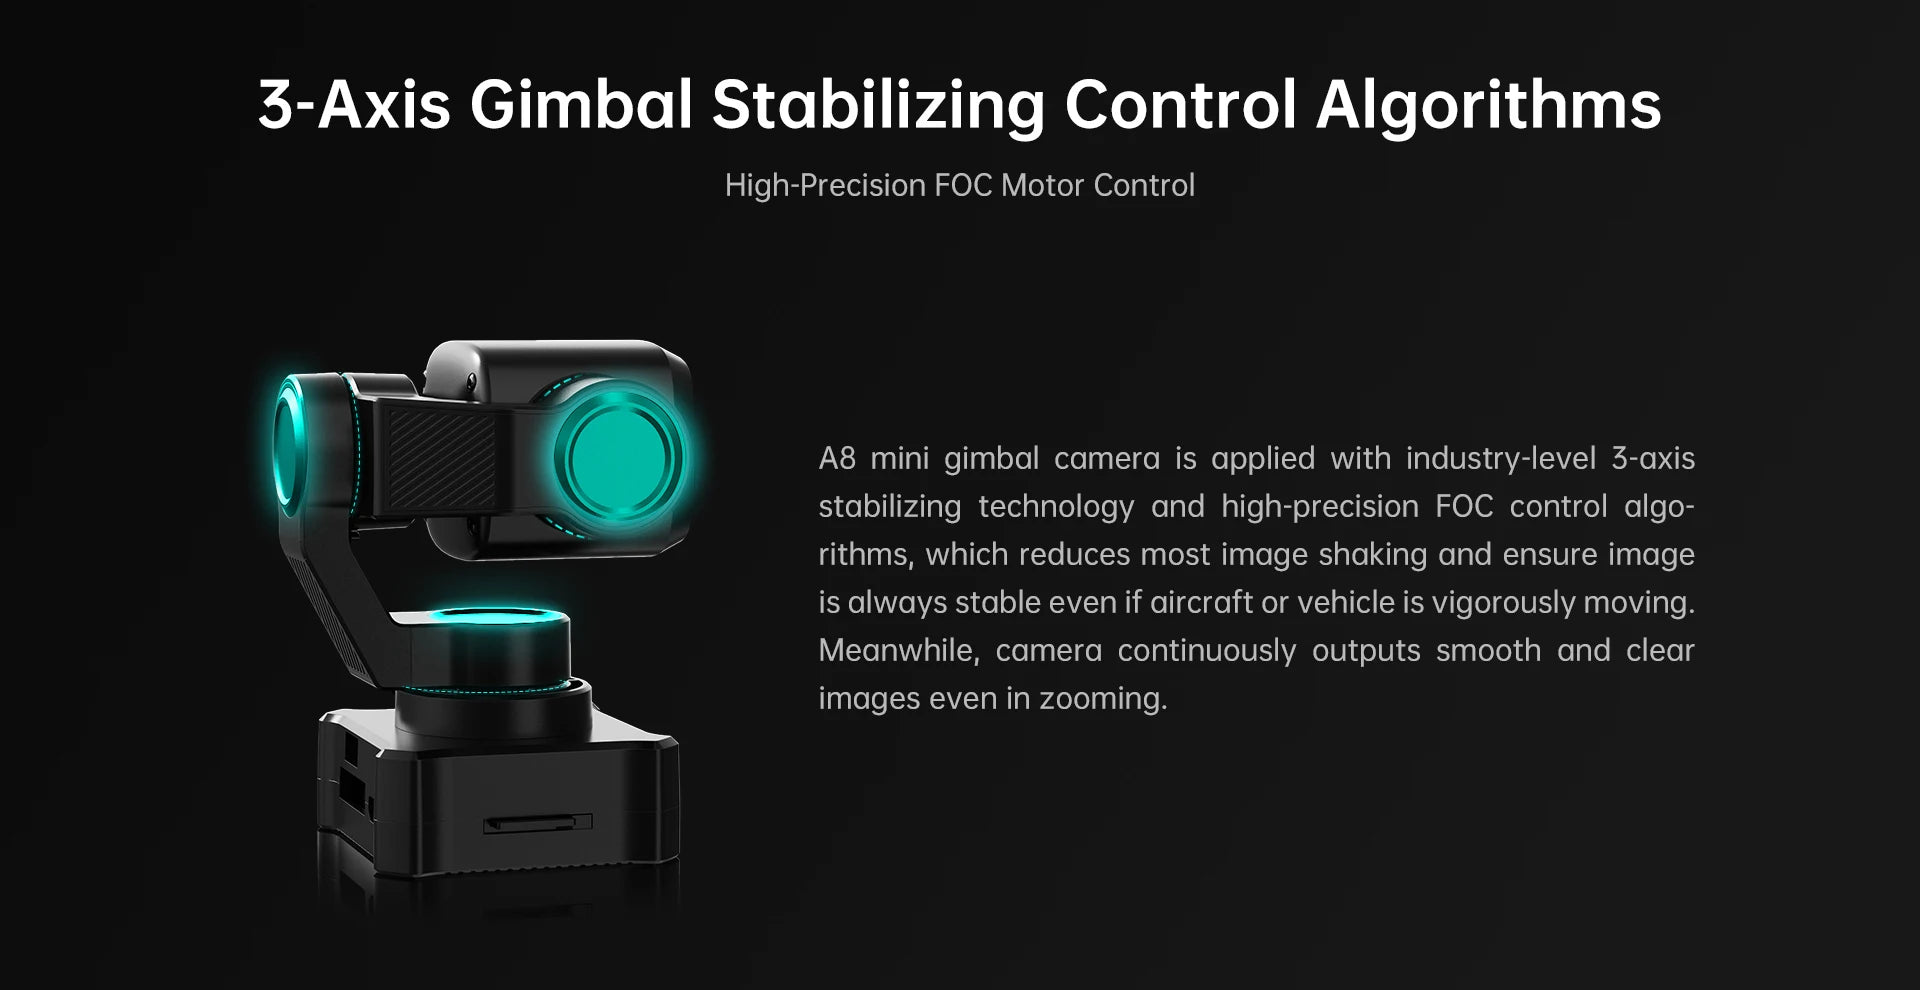 A8 mini gimbal camera is applied with industry-level 3-axis stabilizing